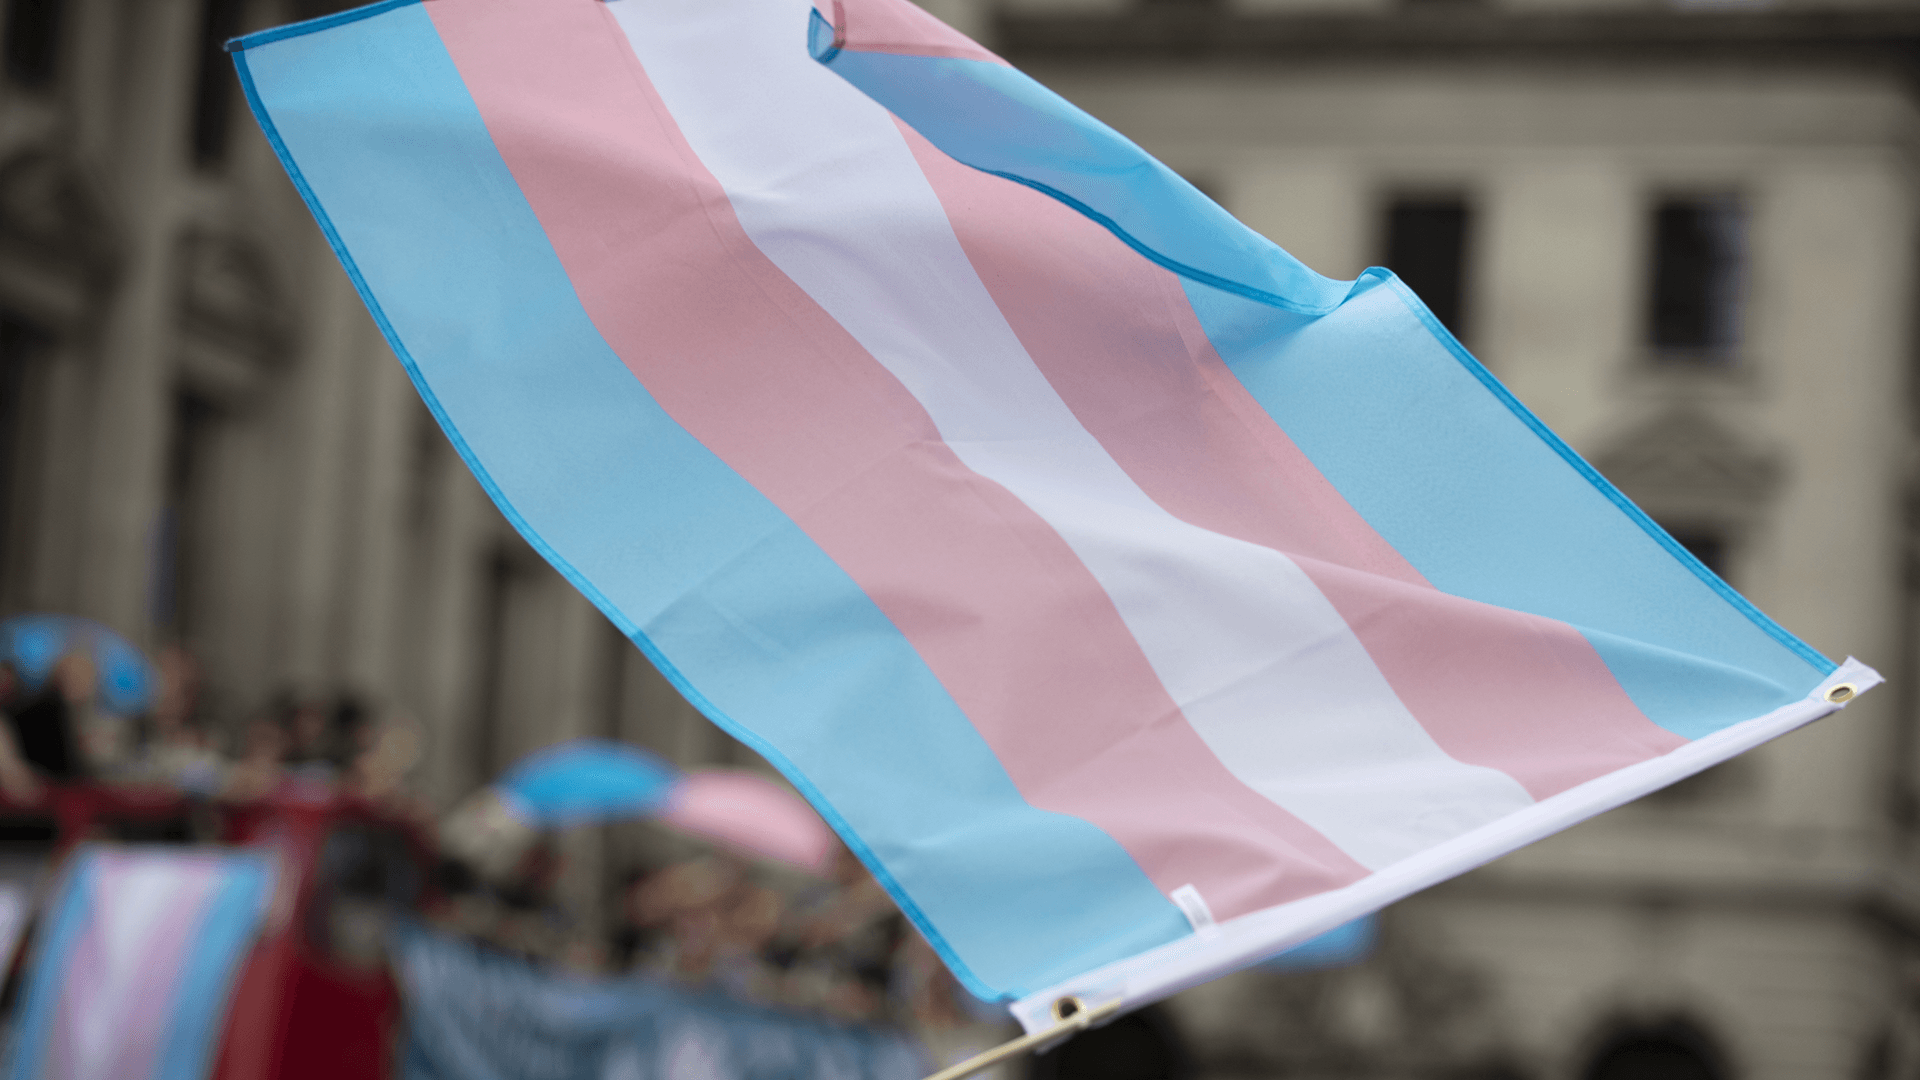 Canadian Human Rights Tribunal reinforces protections afforded to transgender employees against workplace discrimination